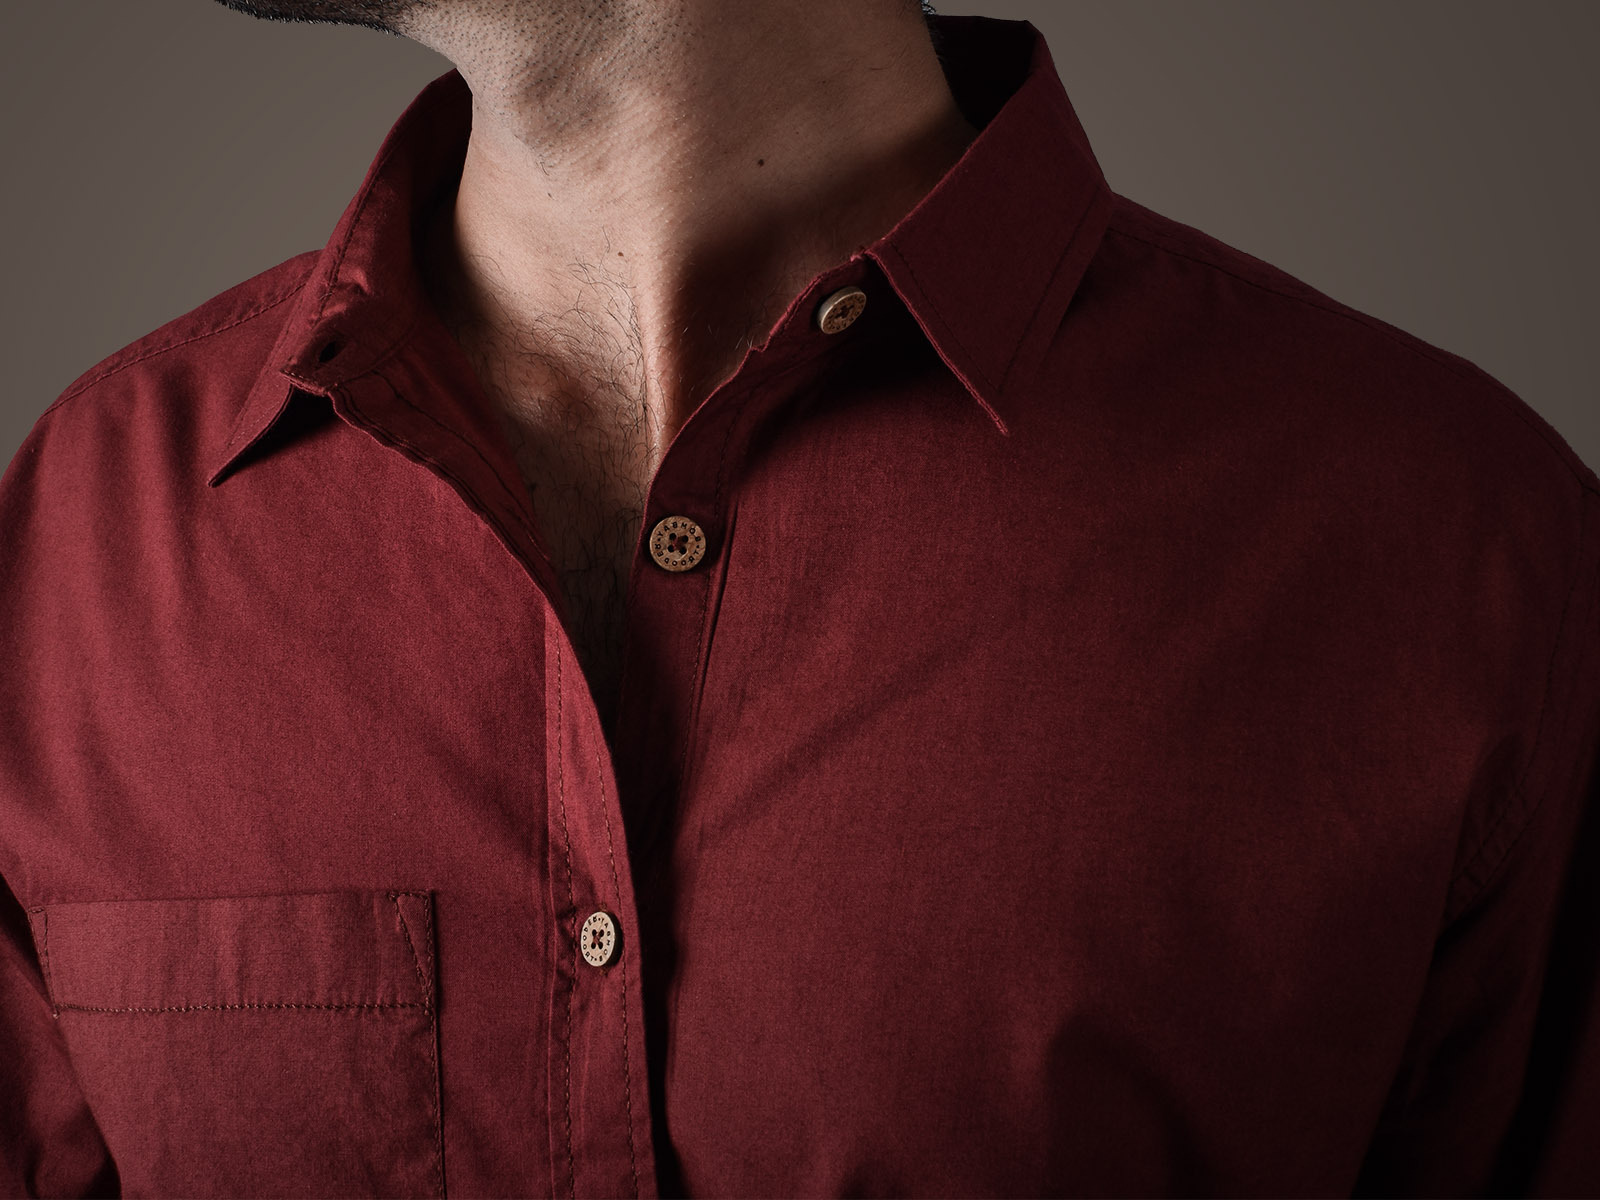 21-facts-about-bamboo-shirt